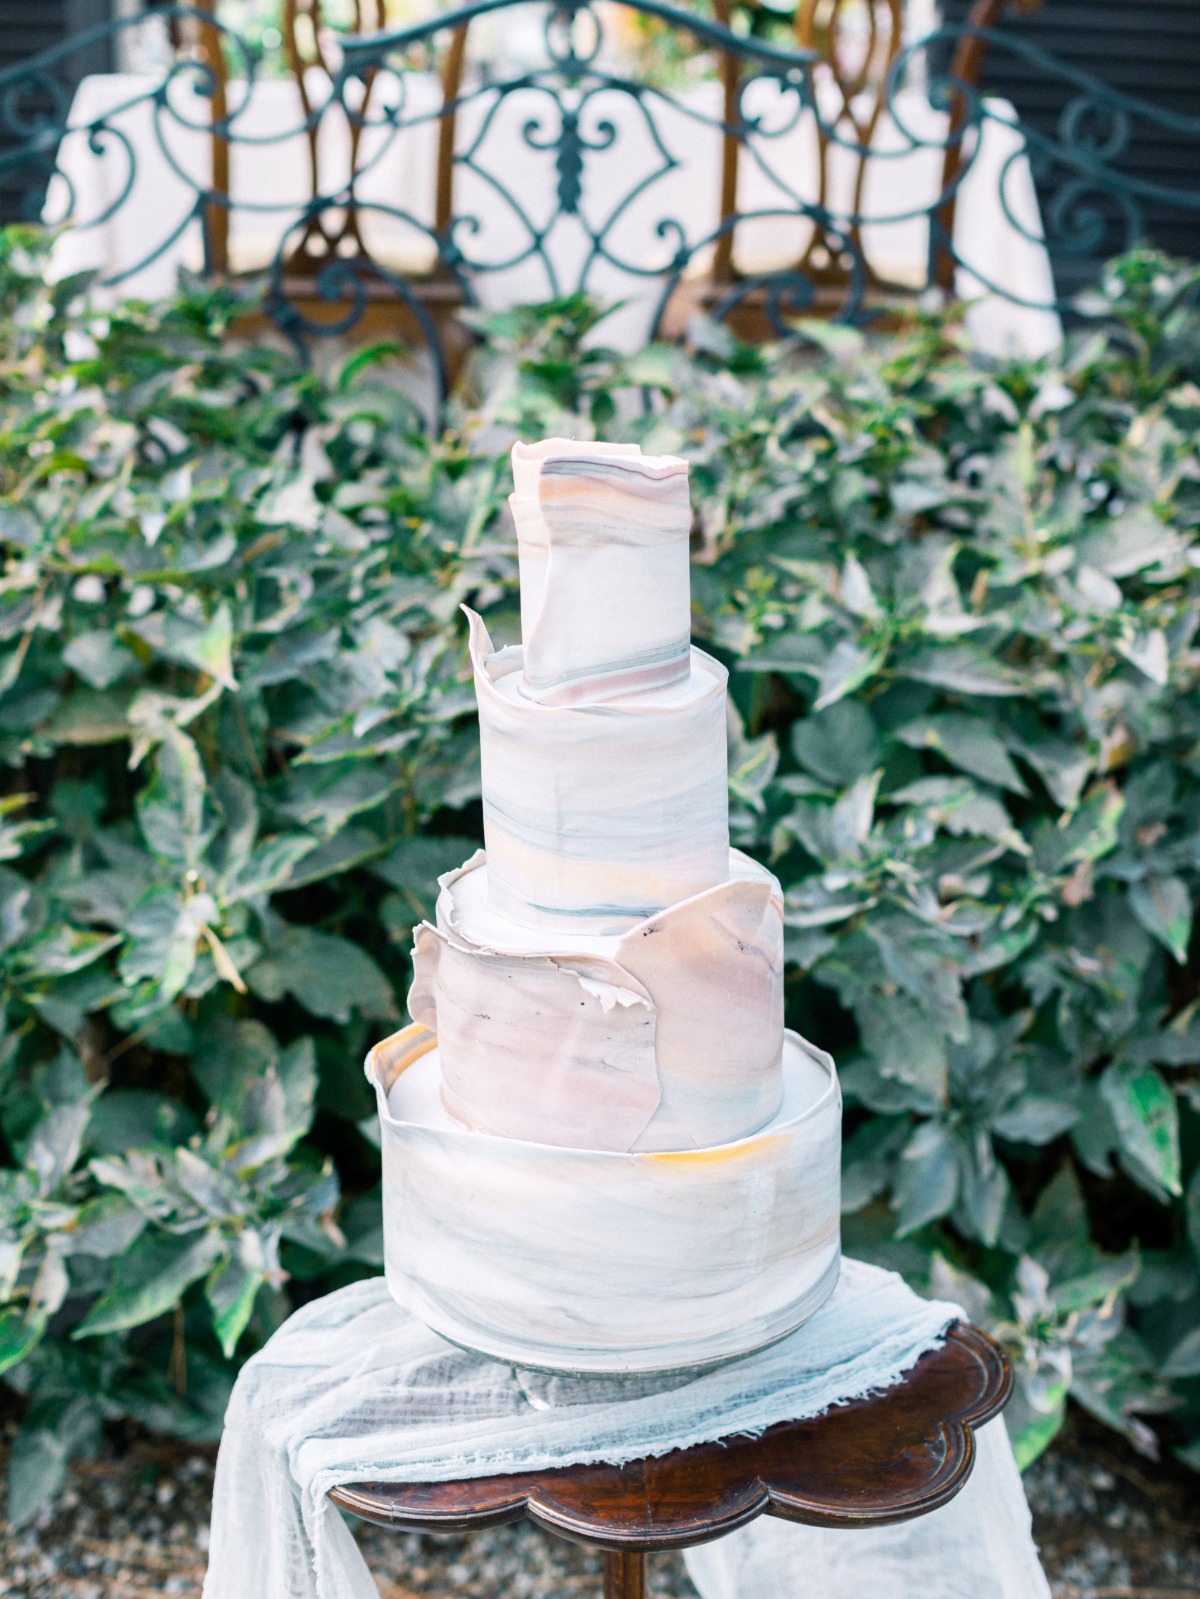 Artistic pastel wedding from Lallaby Cakes